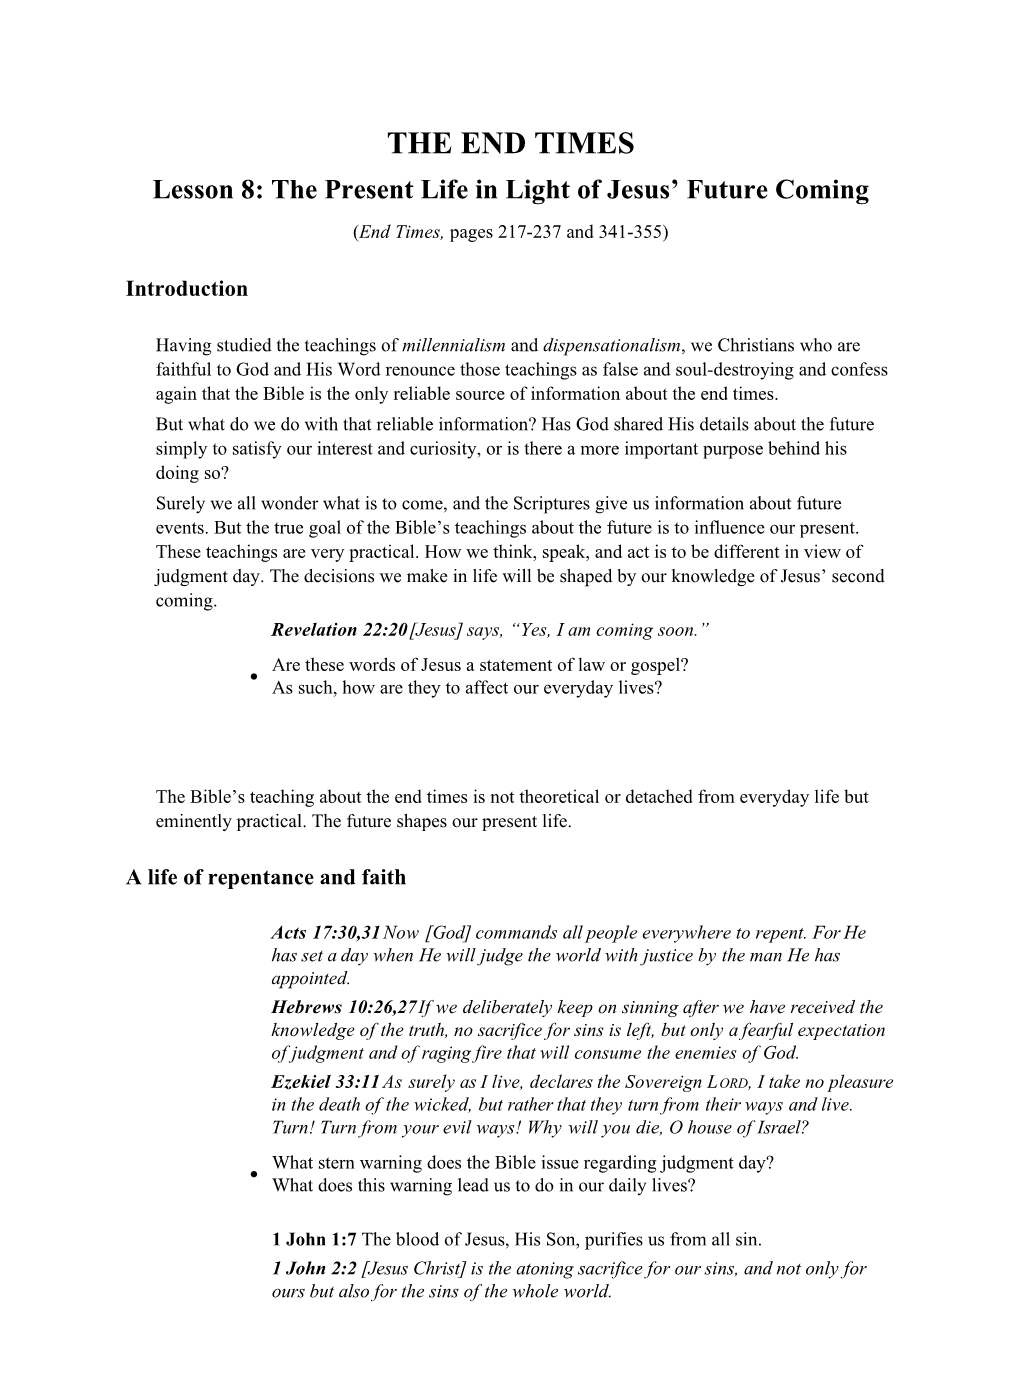 Lesson 8: the Present Life in Light of Jesus Future Coming